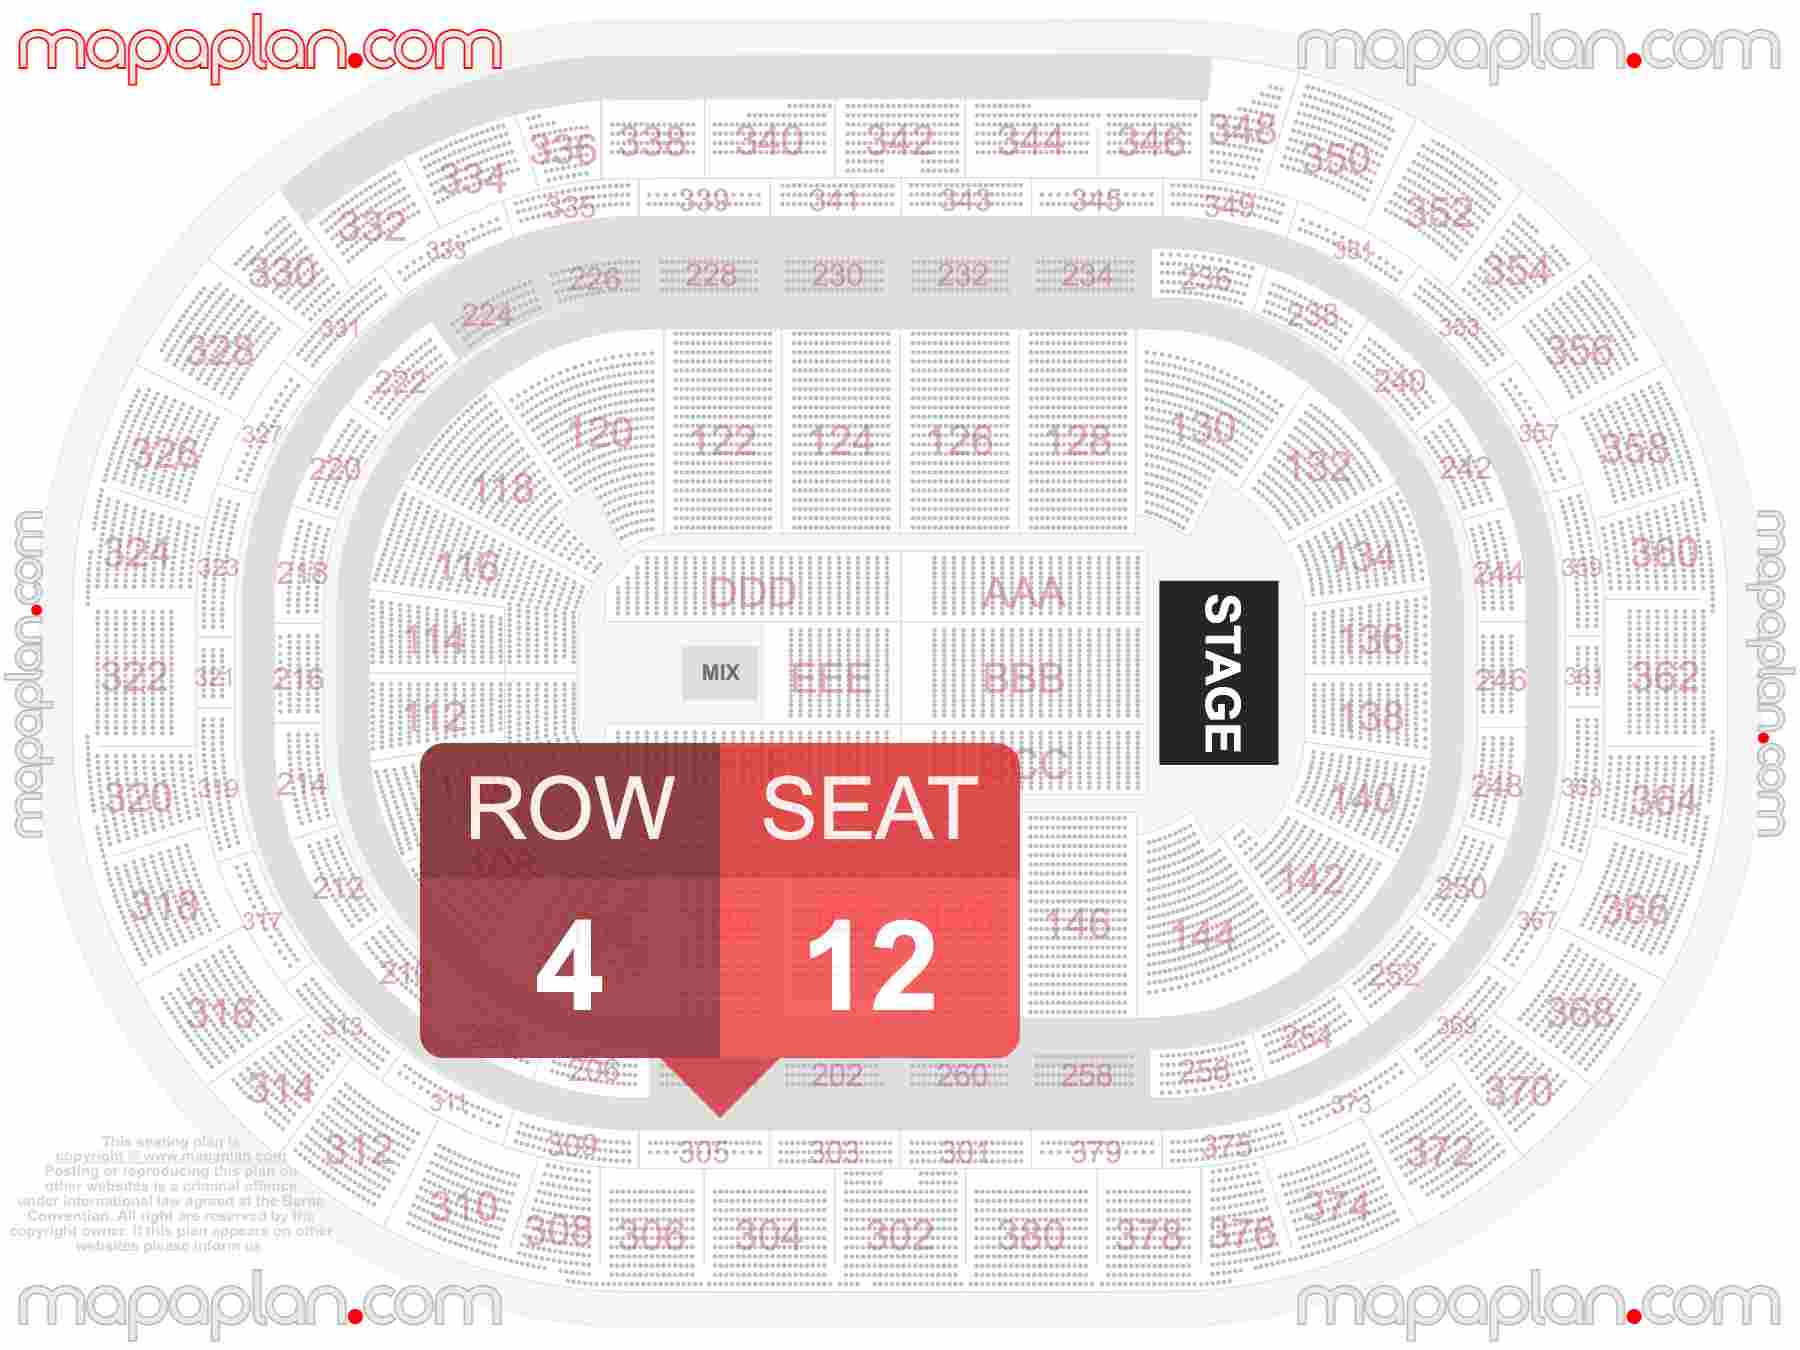 Denver Ball Arena seating chart Concert detailed seat numbers and row numbering chart with interactive map plan layout